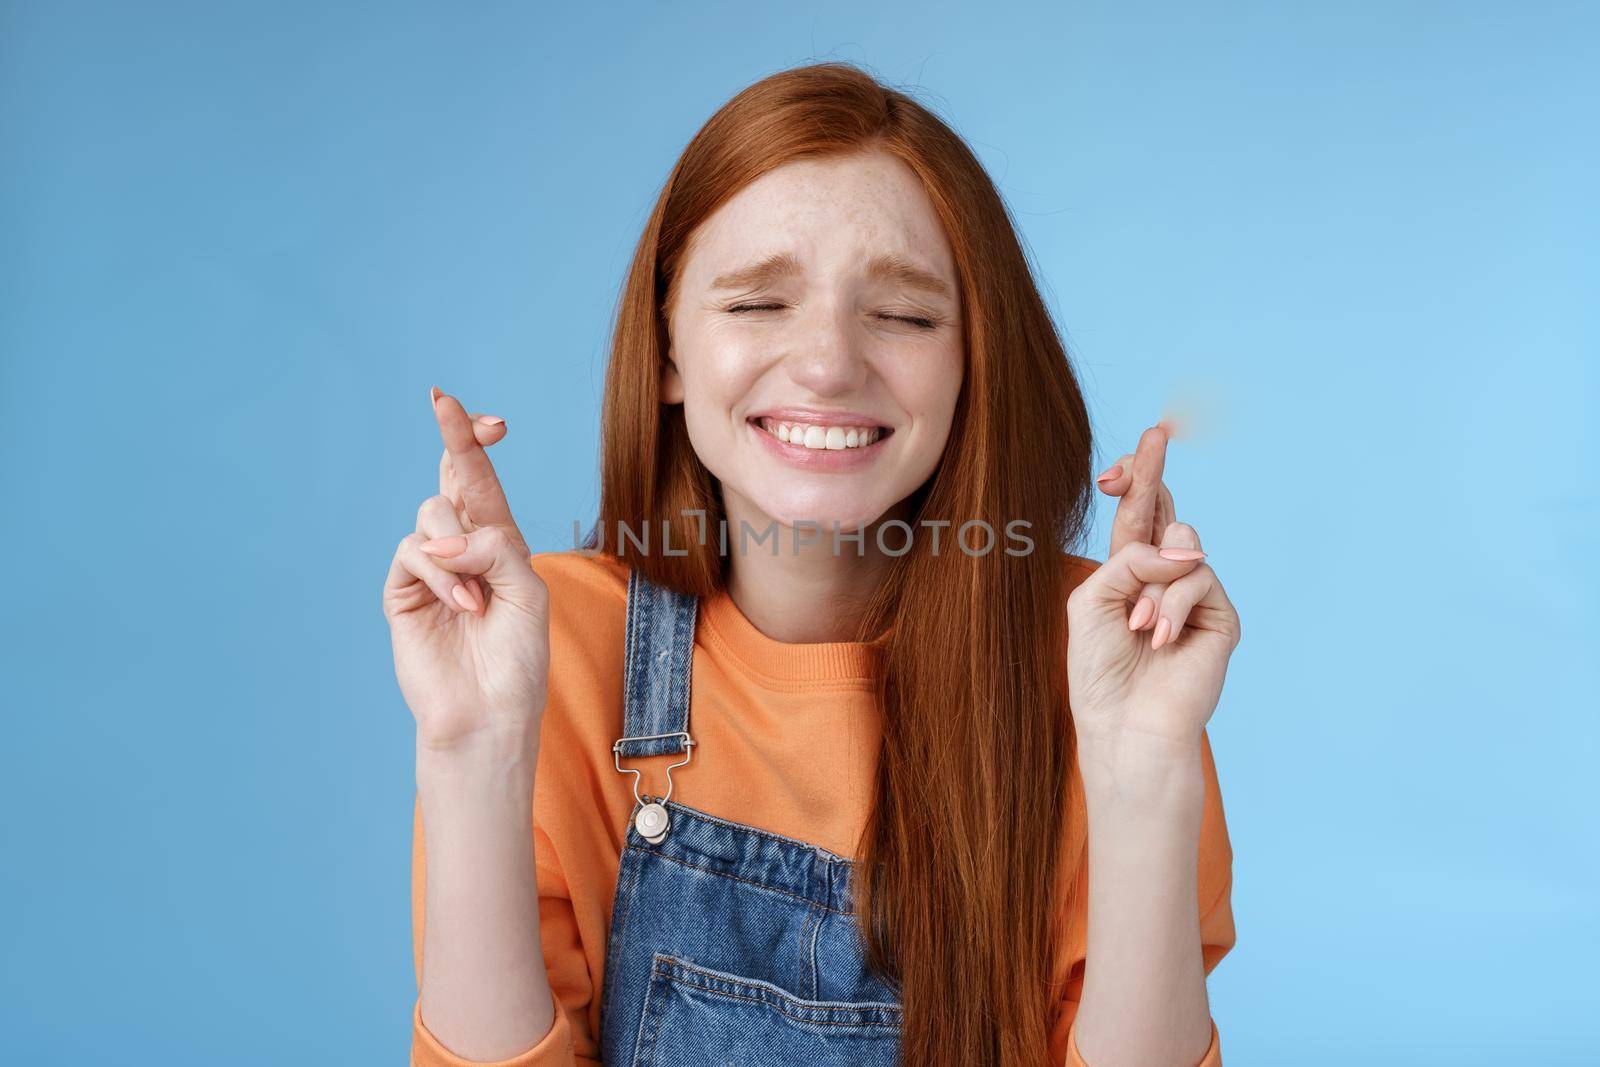 Sincere hopeful cute redhead girl believe miracle close eyes faithfully praying cross fingers good luck hope dream come true make wish eager hear positive results, anticipating blue background.